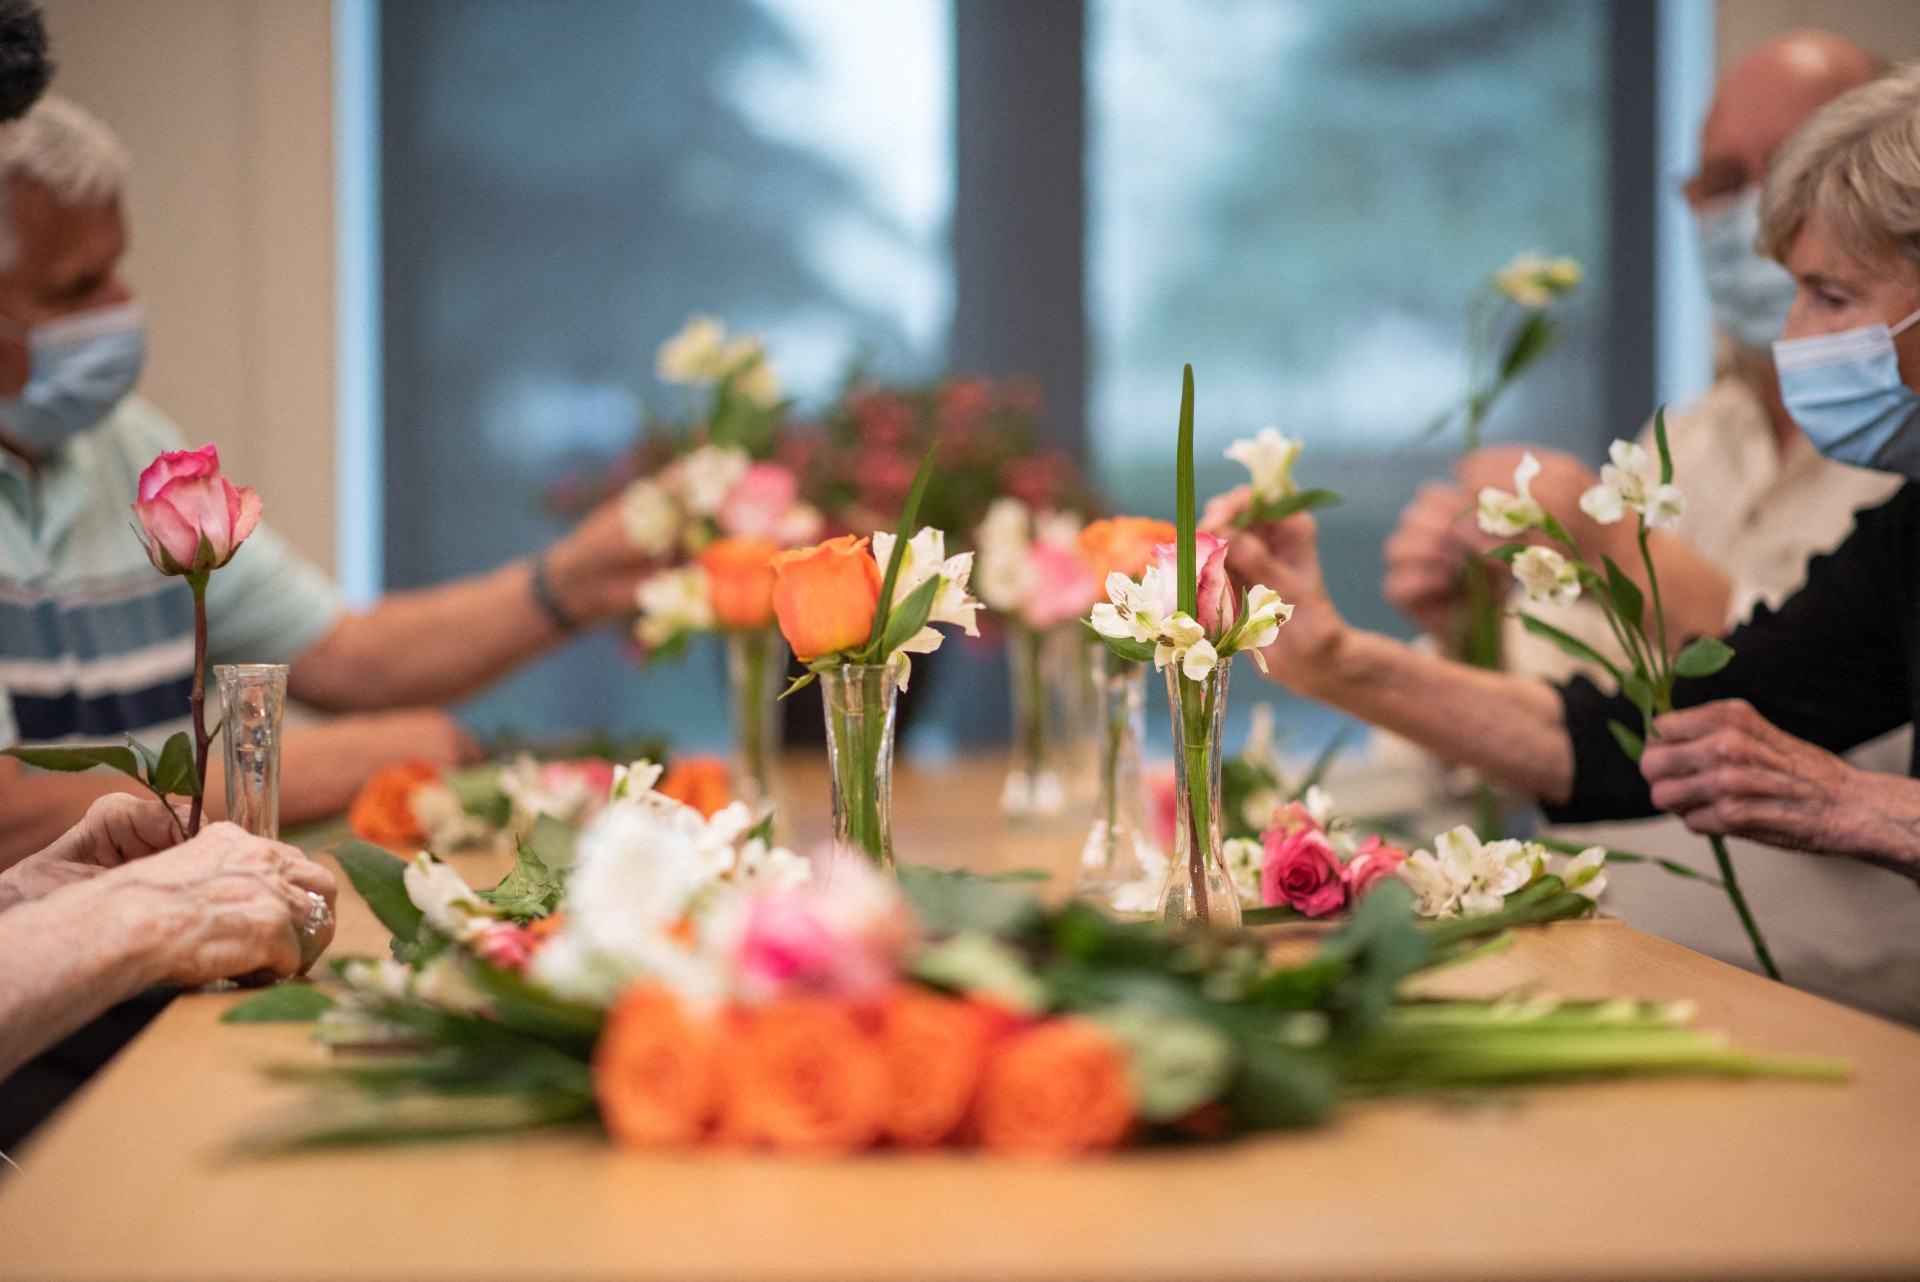 Residents learning flower arranging at the Growing Fields centre at Silvera's Westview community